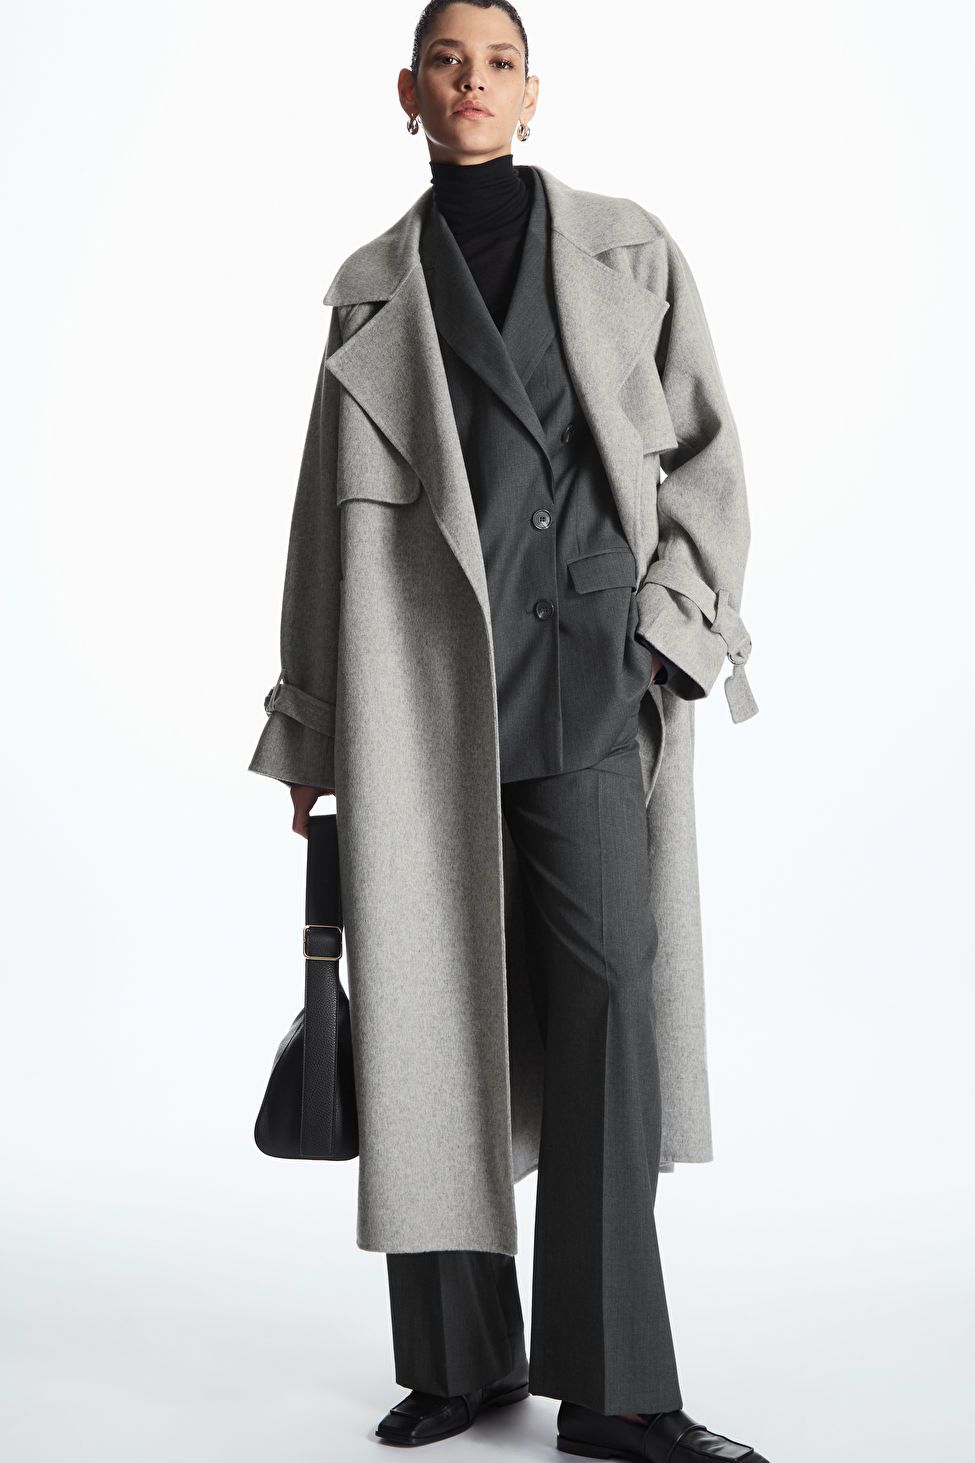 DOUBLE-FACED WOOL TRENCH COAT | COS UK